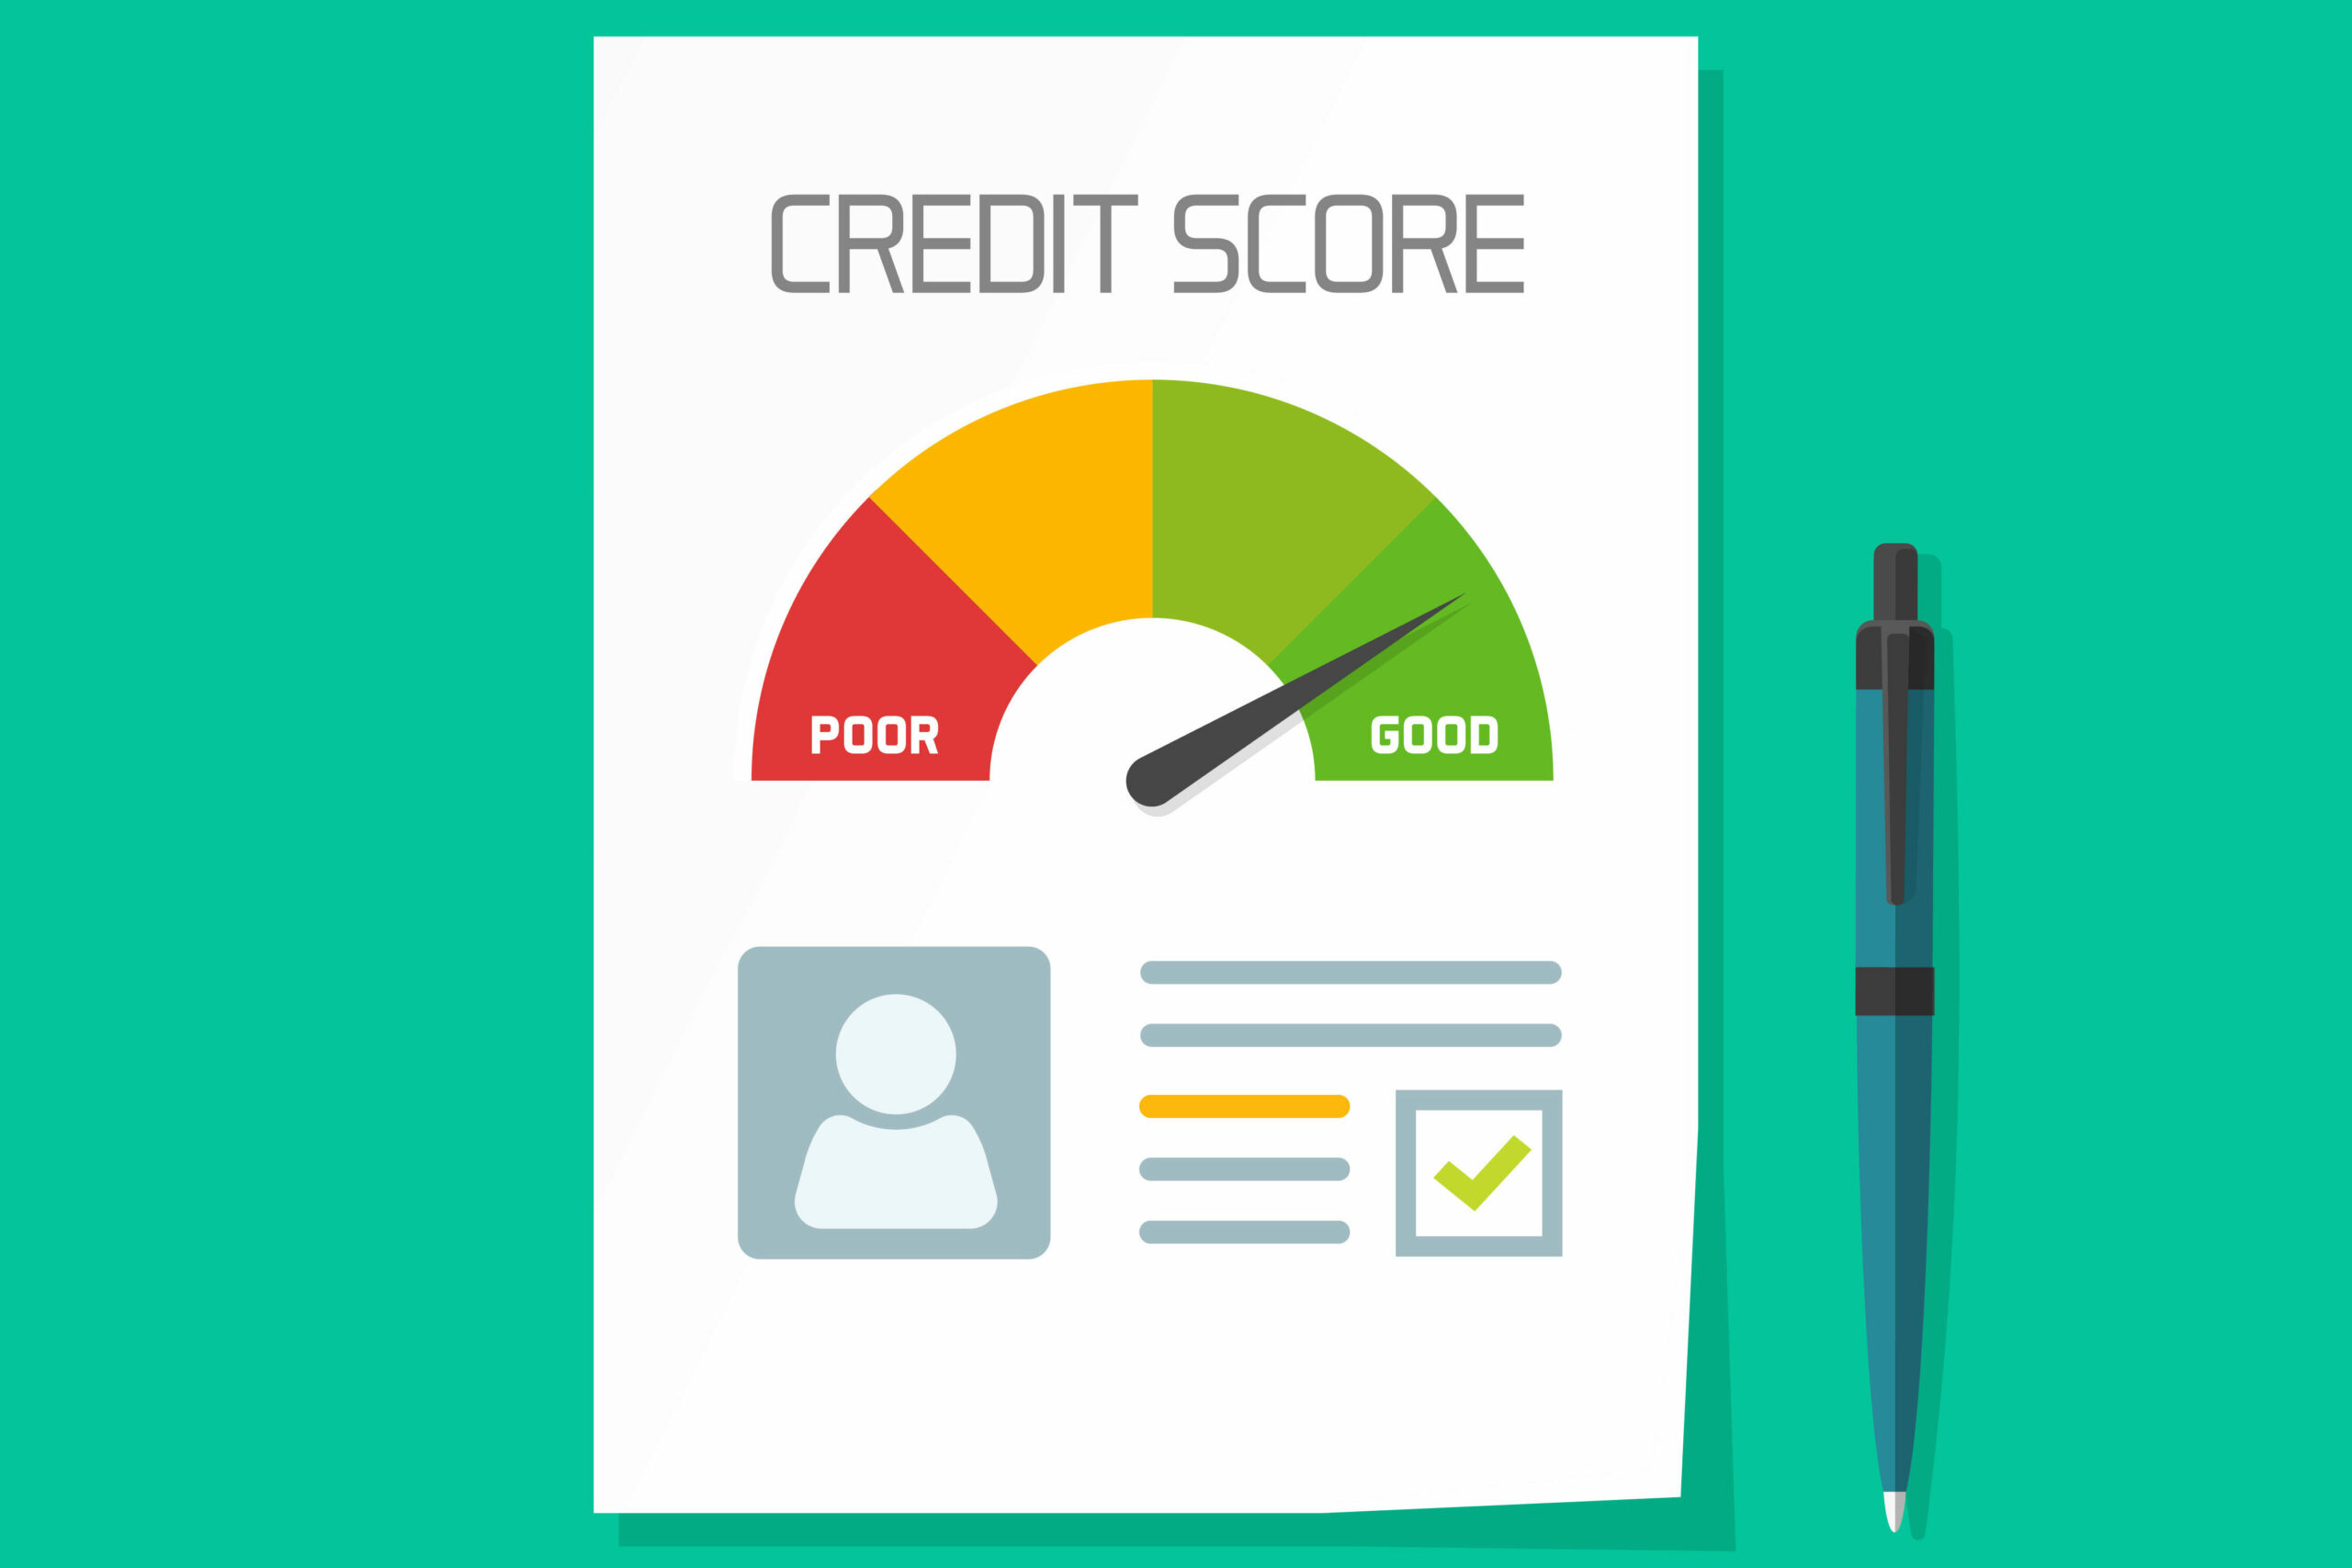 Detailed view of a credit score report showing various credit factors like payment history, credit utilization, and total credit score, essential for financial analysis and credit improvement strategies.